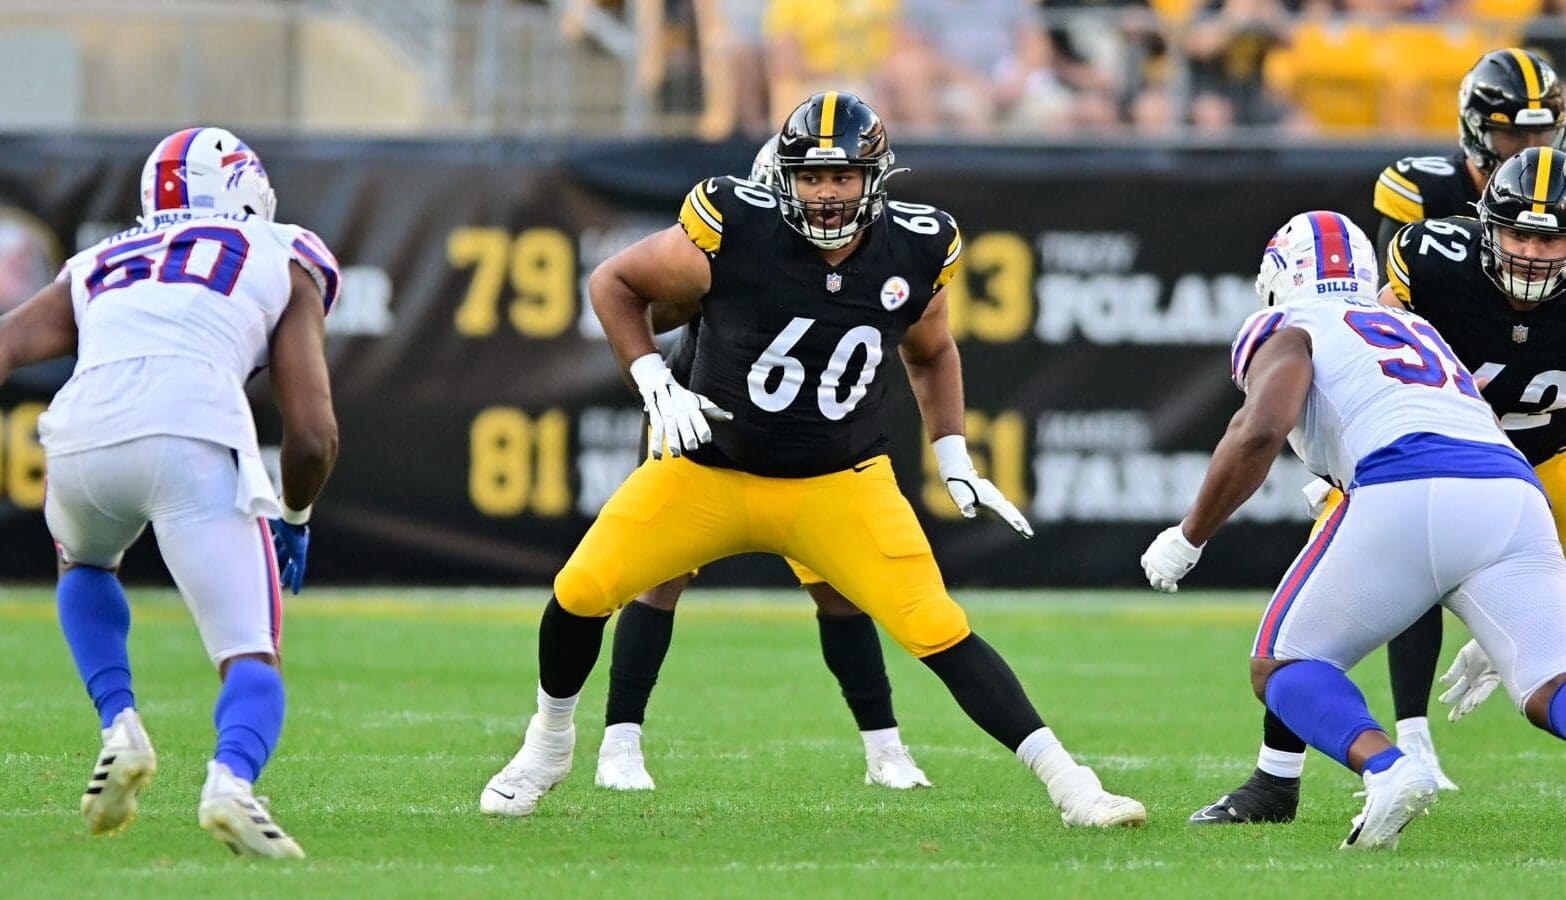 Steelers OT Dylan Cook